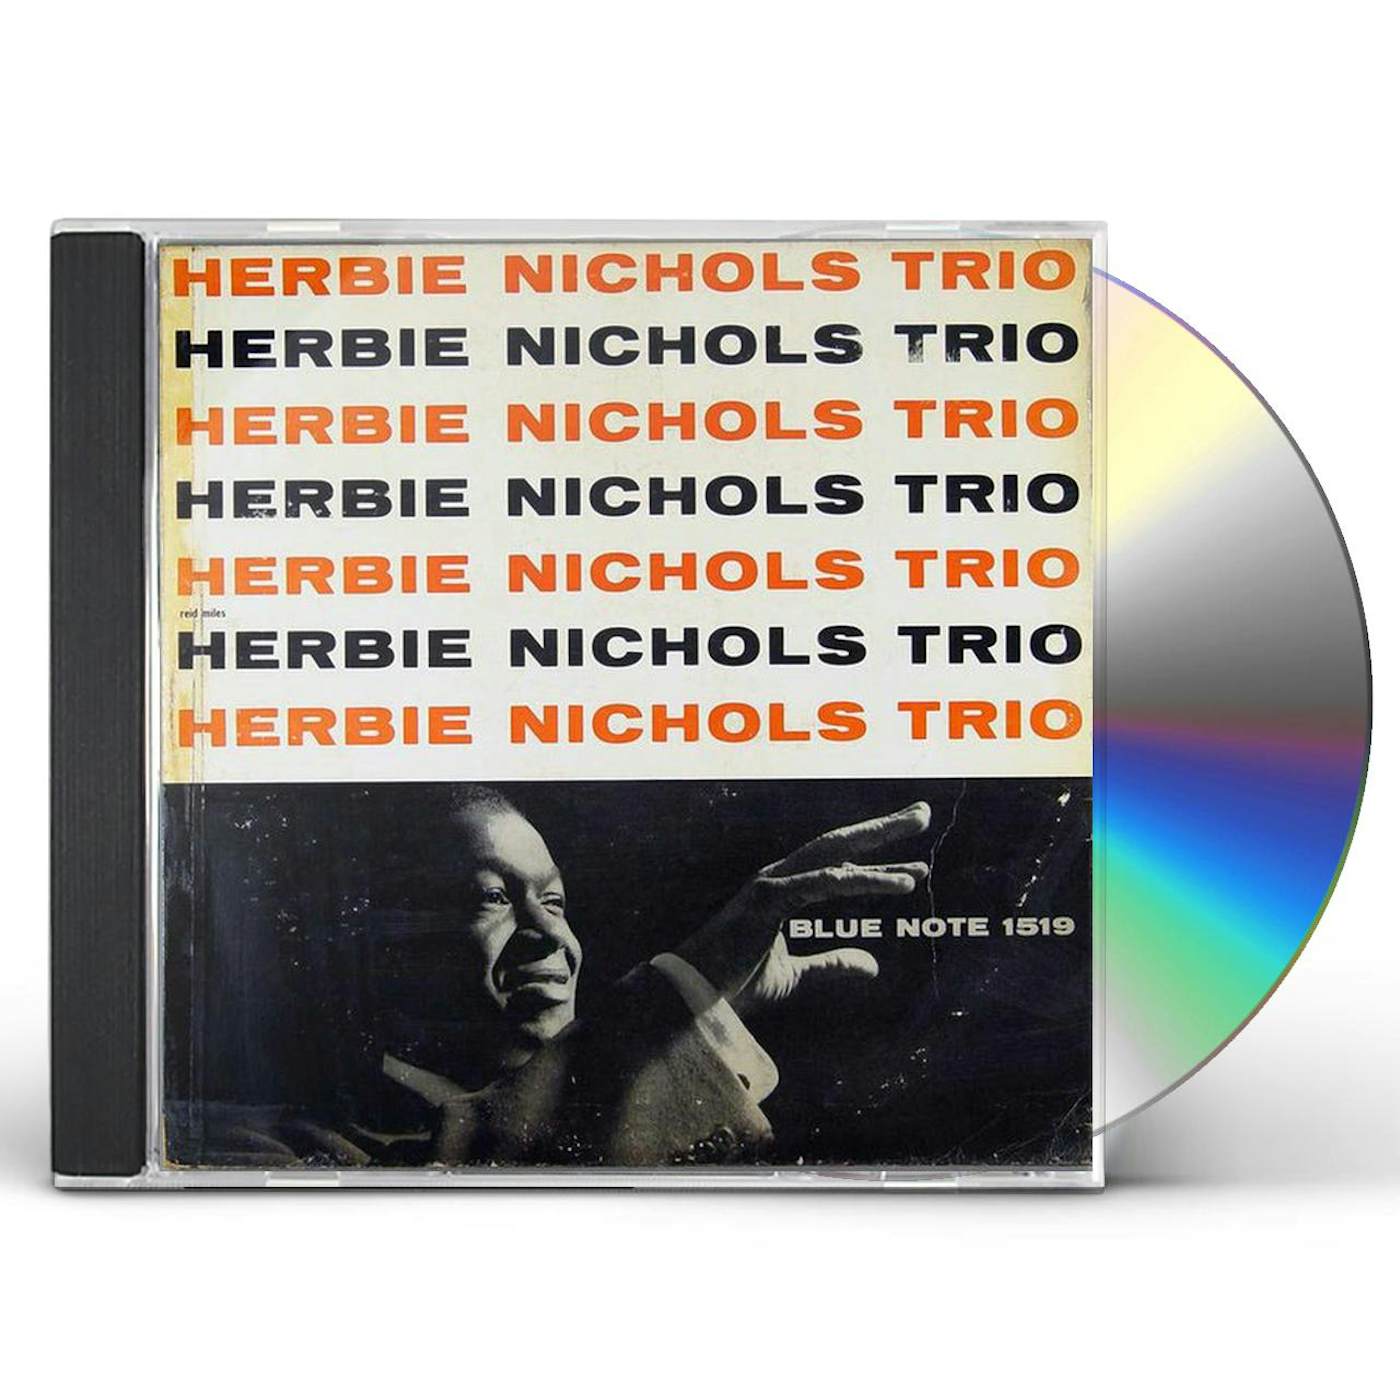 HERBIE NICHOLS TRIO (UHQCD) (BLUE NOTE 85TH ANNIVERSARY EDITION/REMASTERED BY KEVIN GRAY) CD